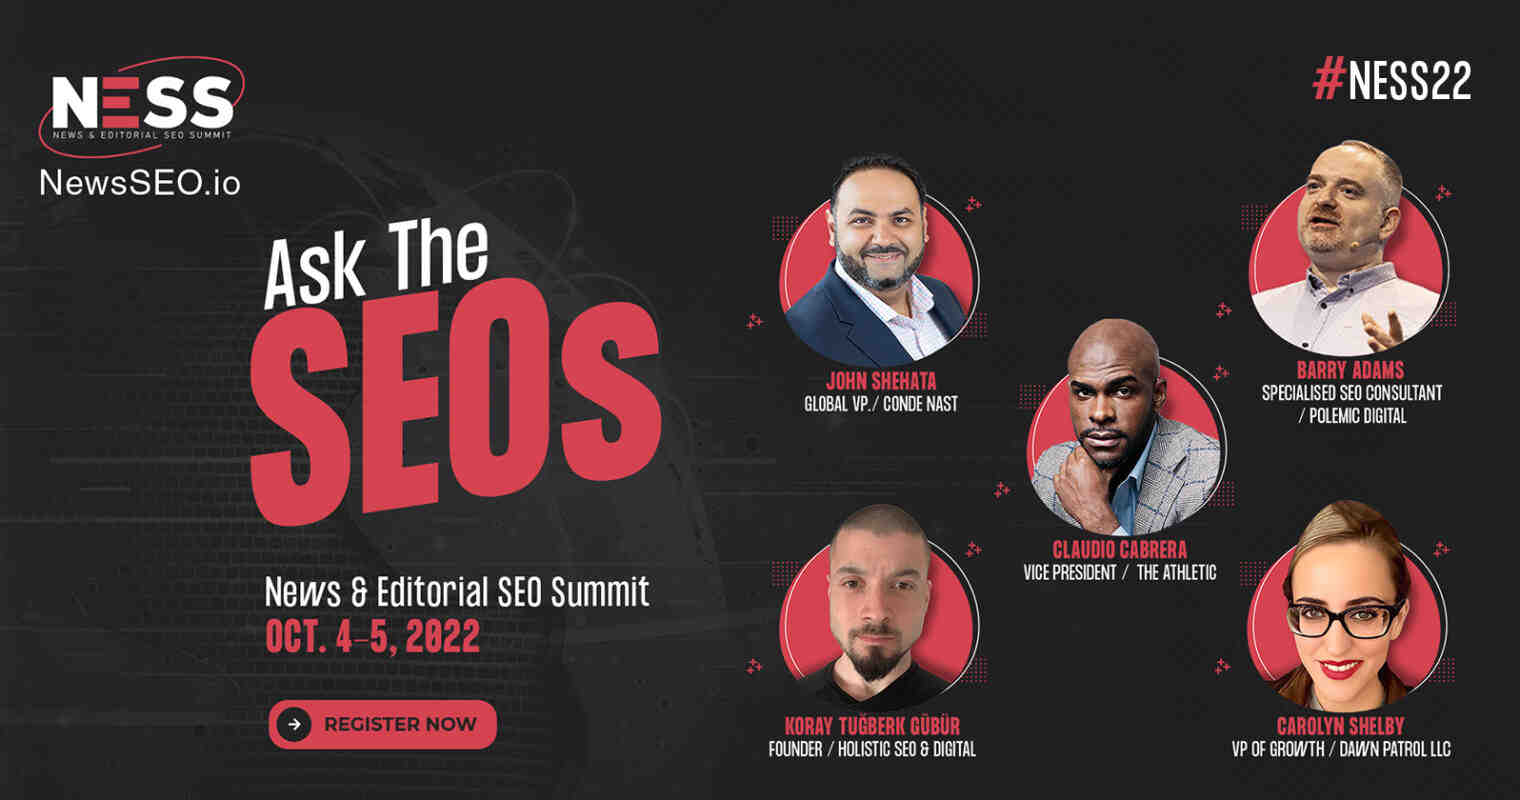 What Is The News & Editorial SEO Summit?